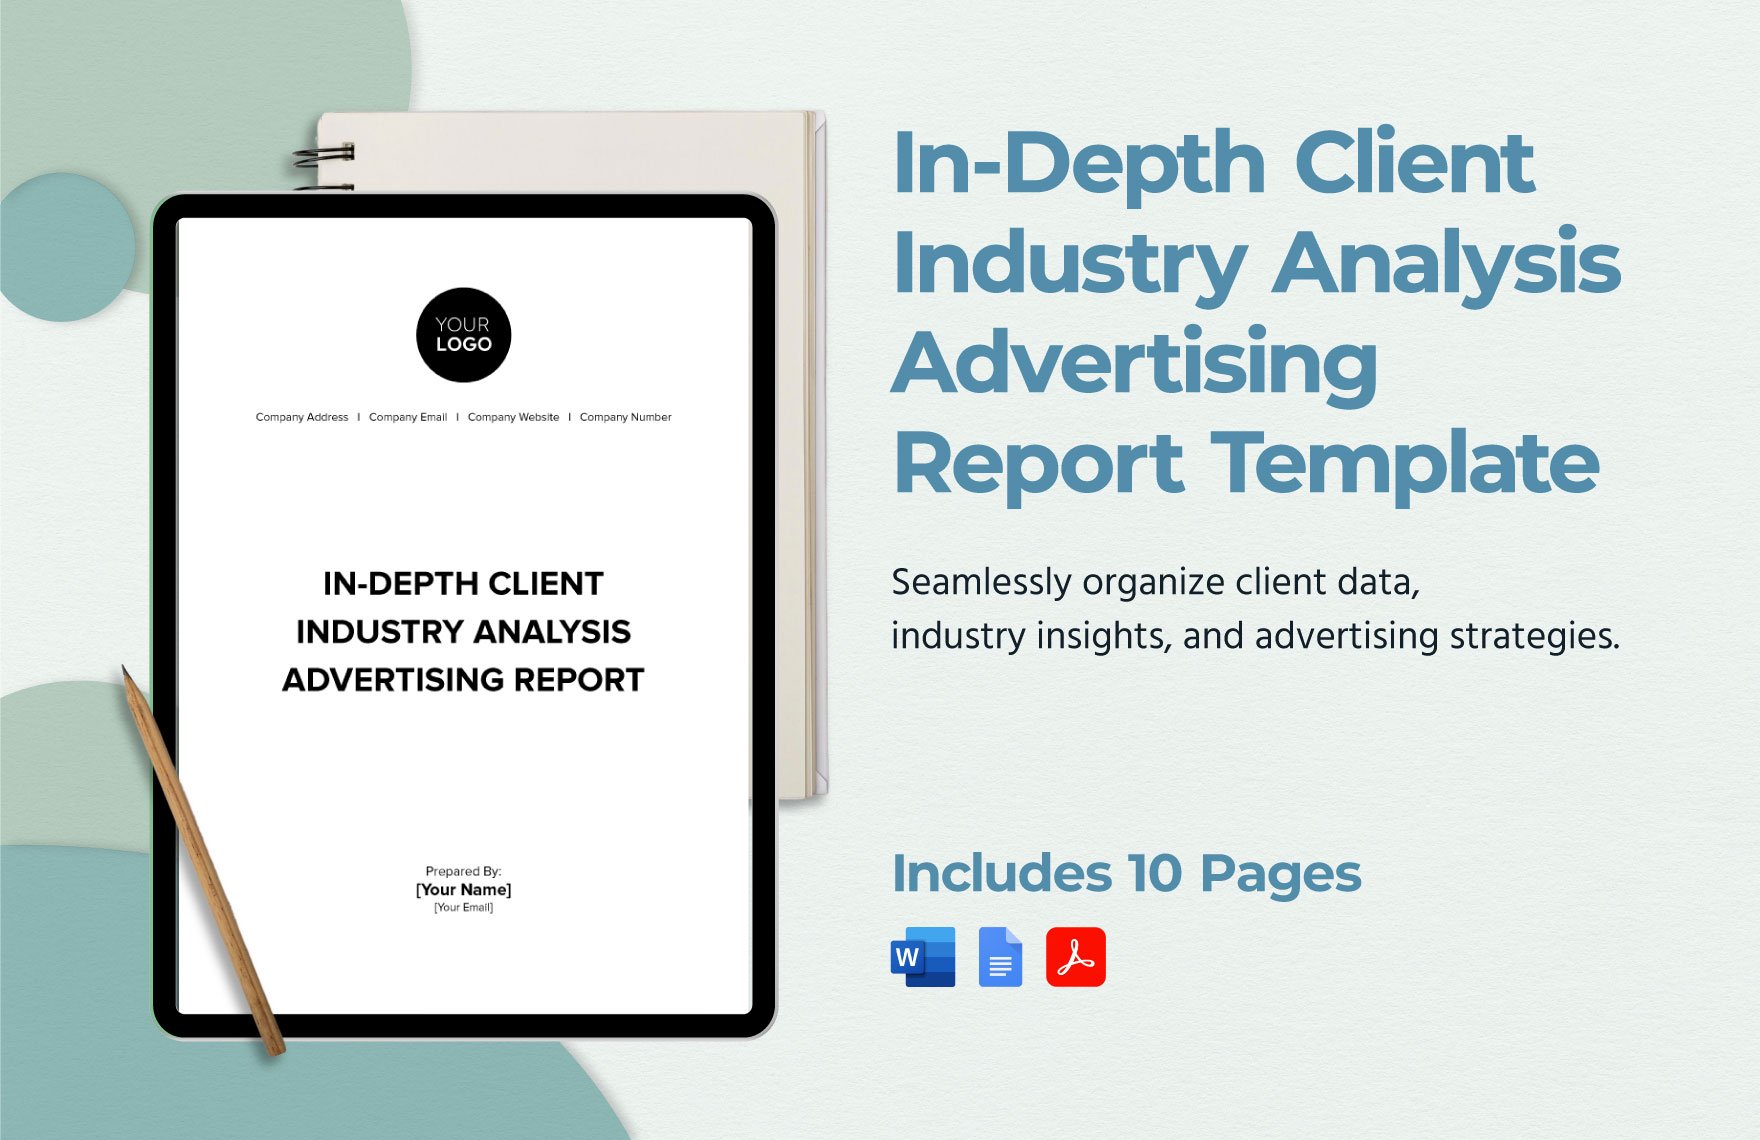 In-Depth Client Industry Analysis Advertising Report Template